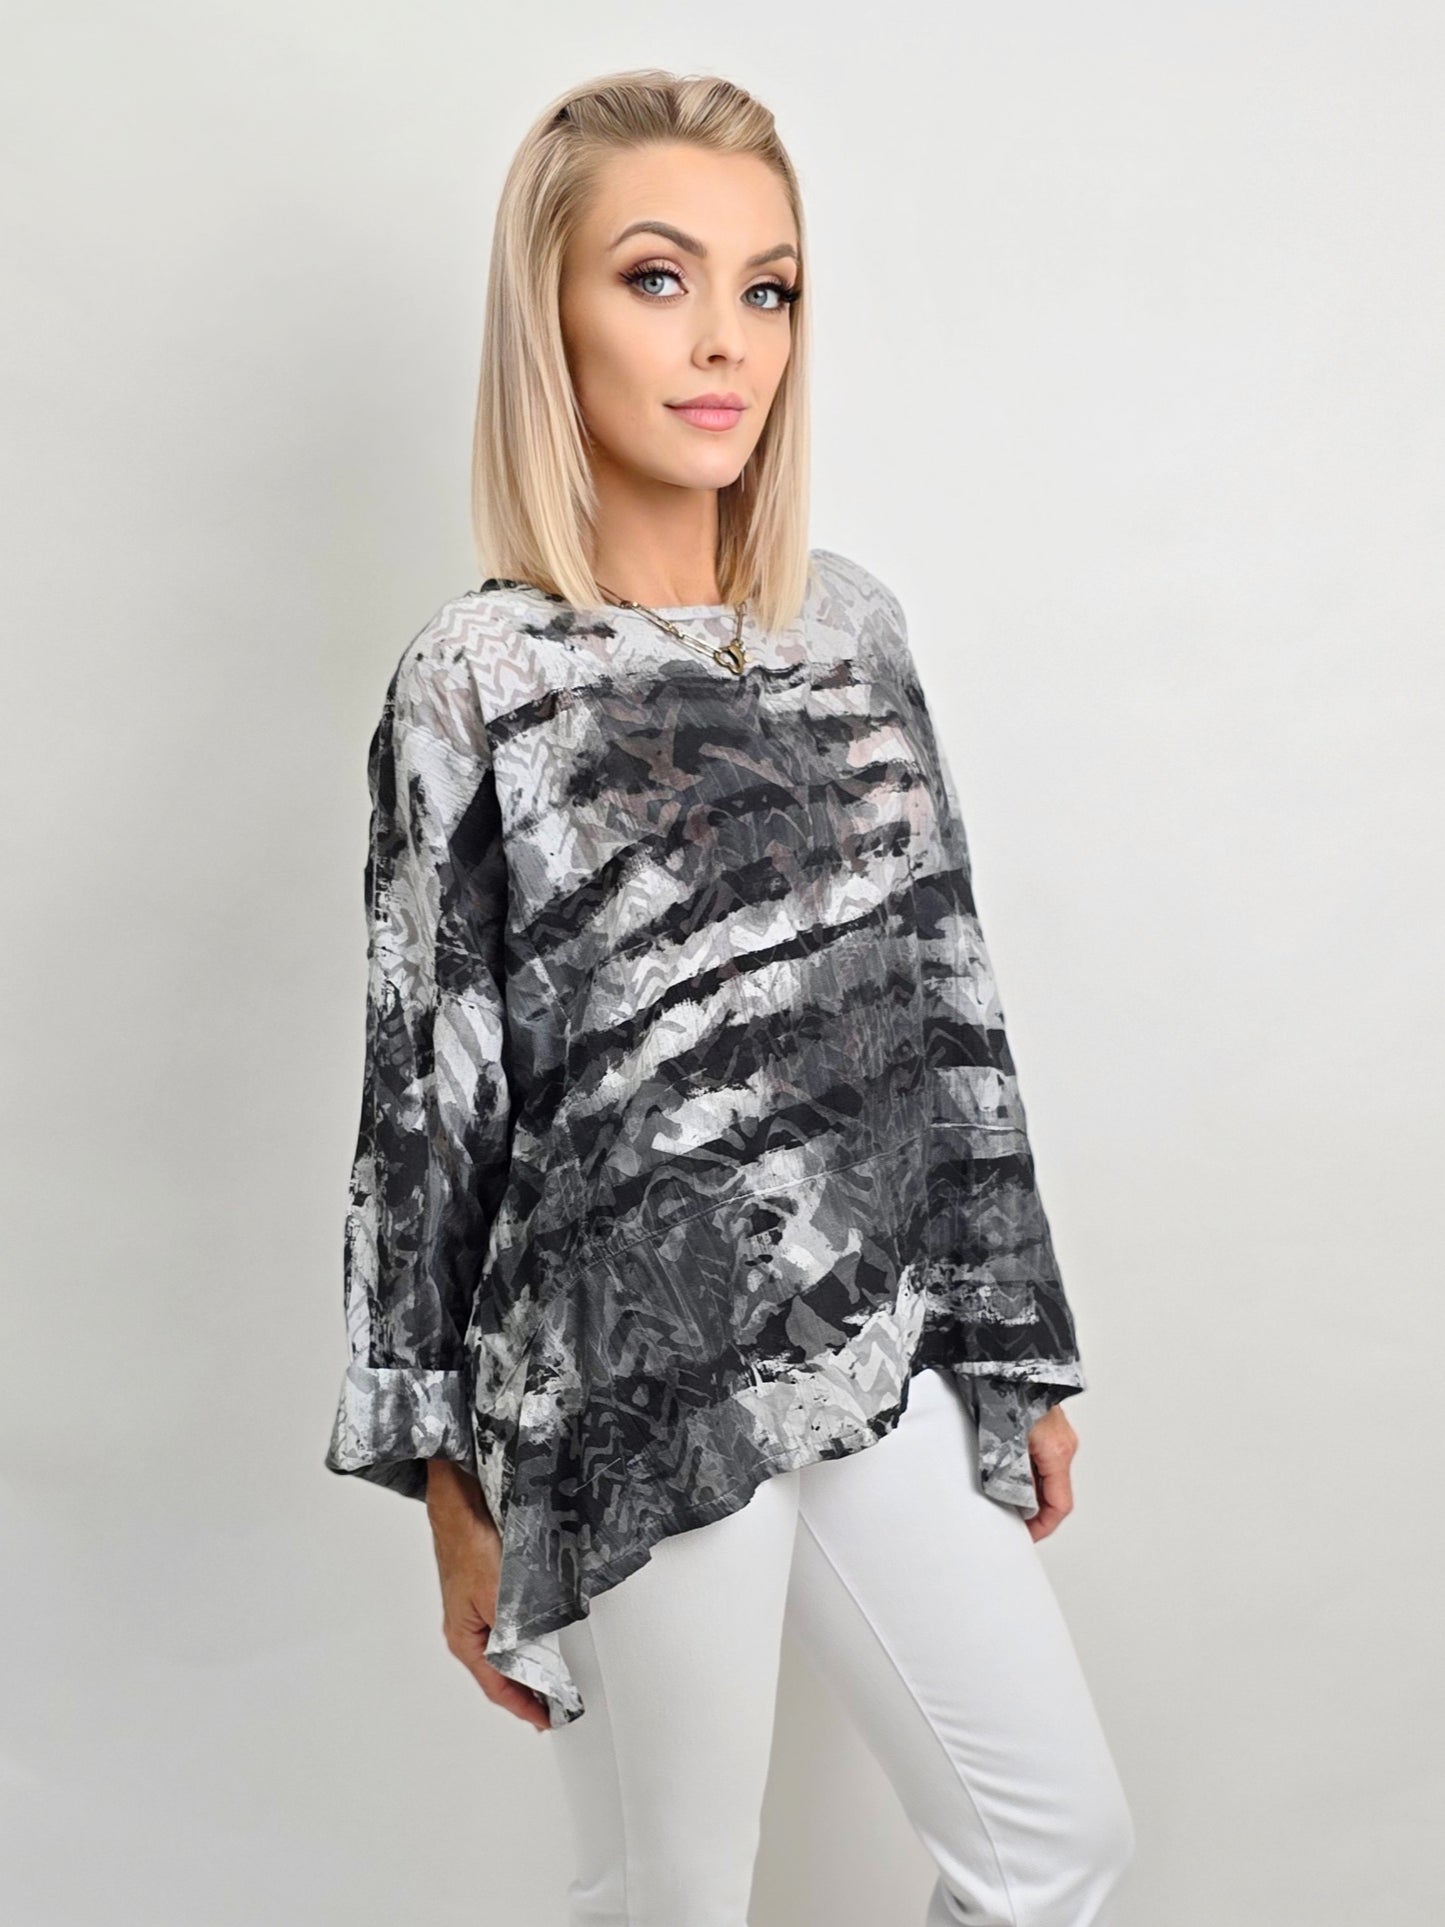 Dress to Kill- Flounce Pullover Top